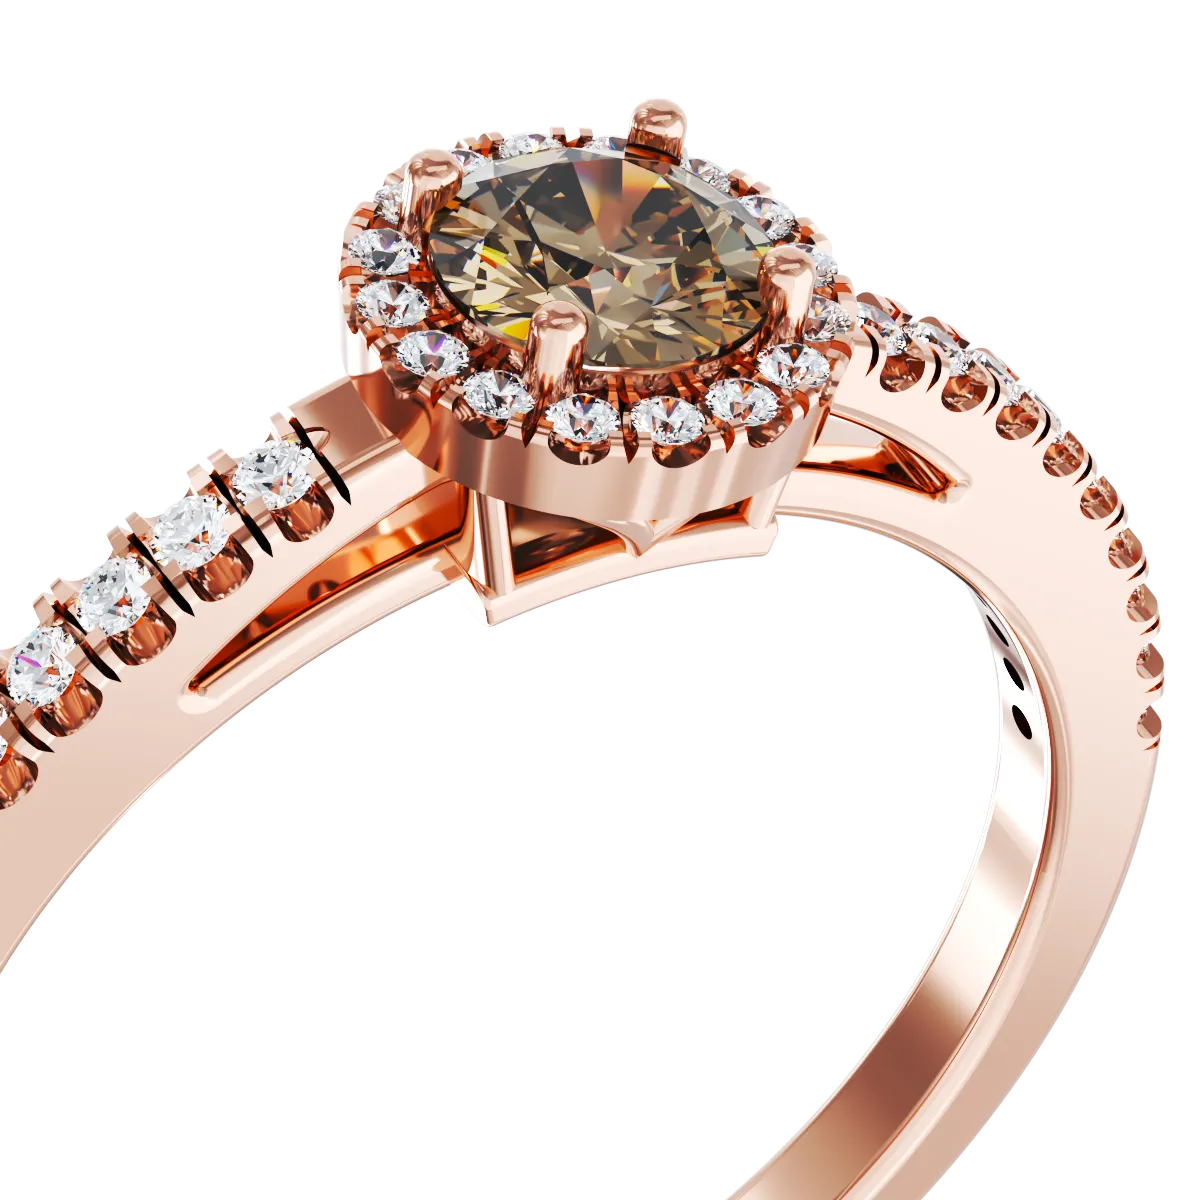 18K rose gold engagement ring with 0.39ct brown diamond and 0.19ct diamonds